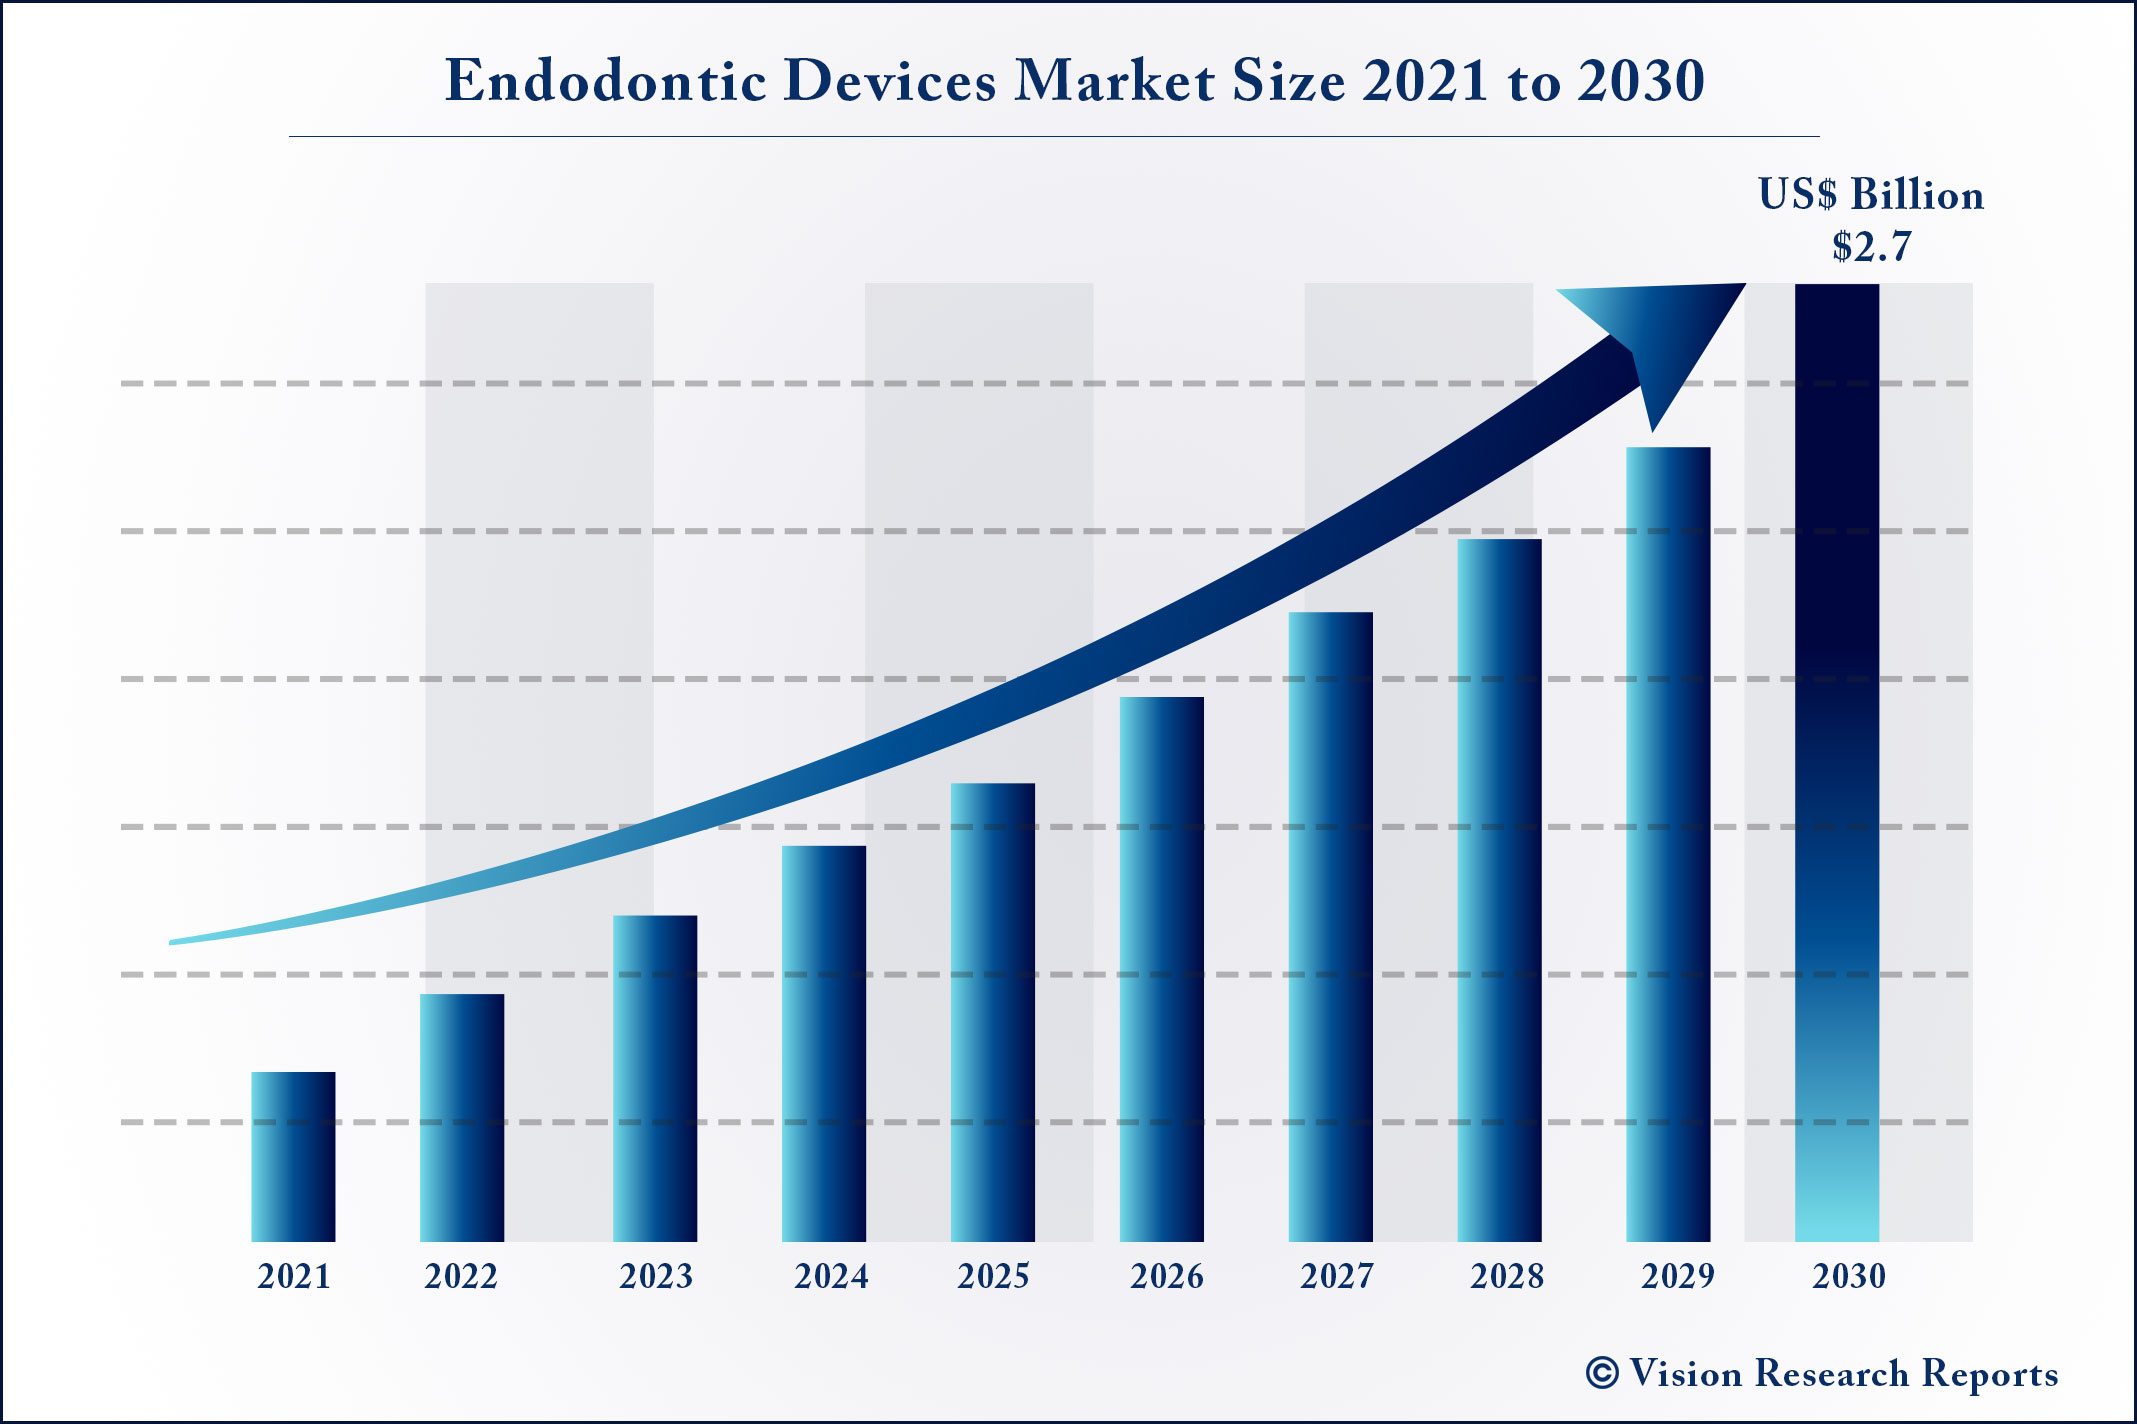 Endodontic Devices Market Size 2021 to 2030